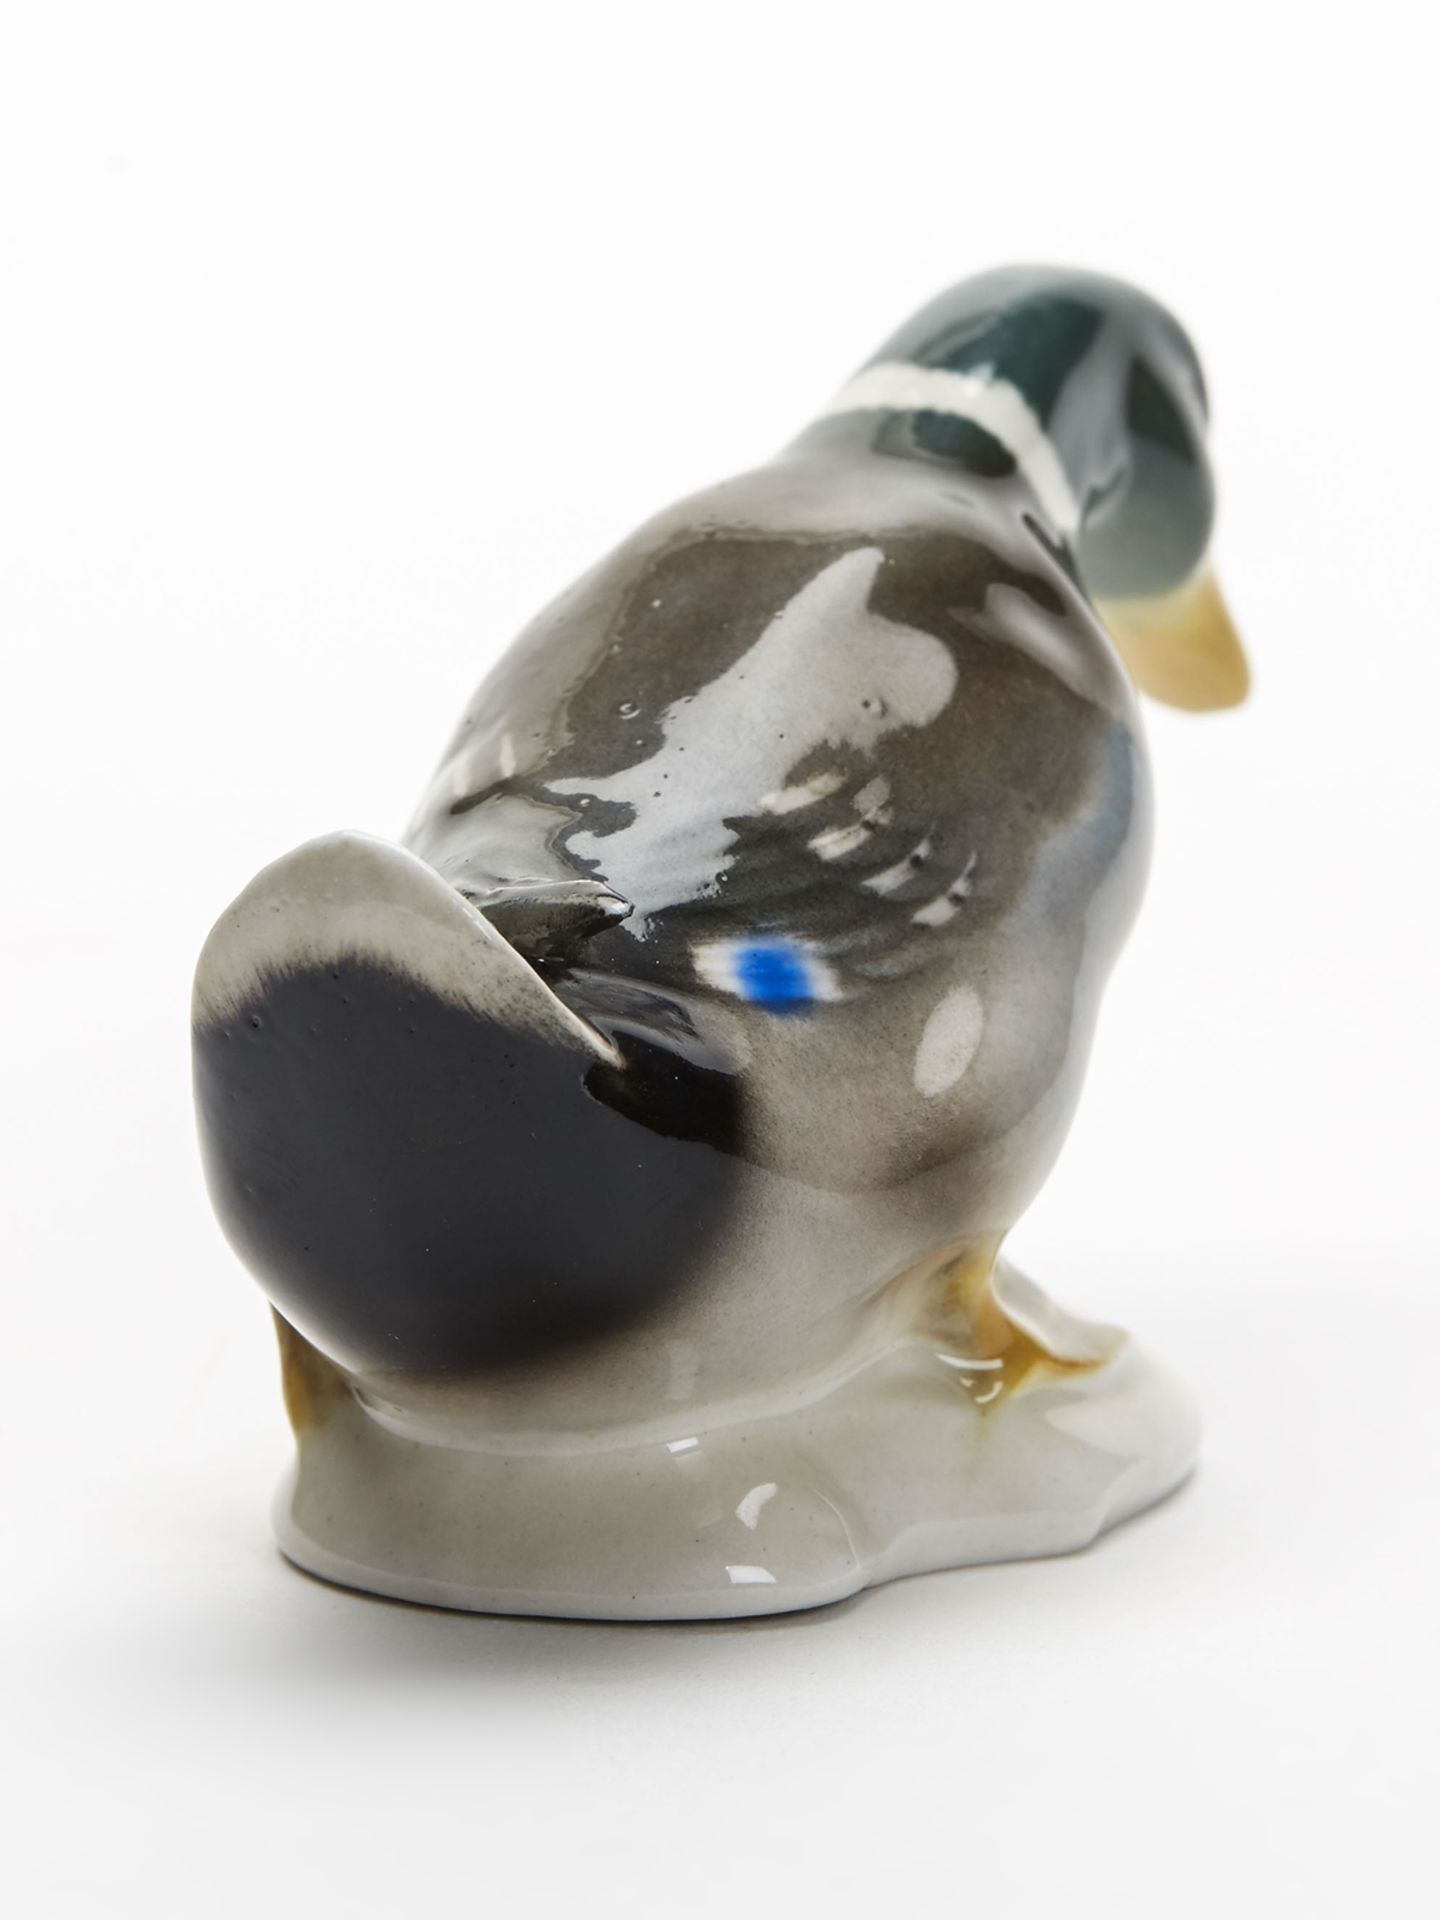 Vintage W Goebel Pottery Figure Of A Duck 20Th C. - Image 3 of 8